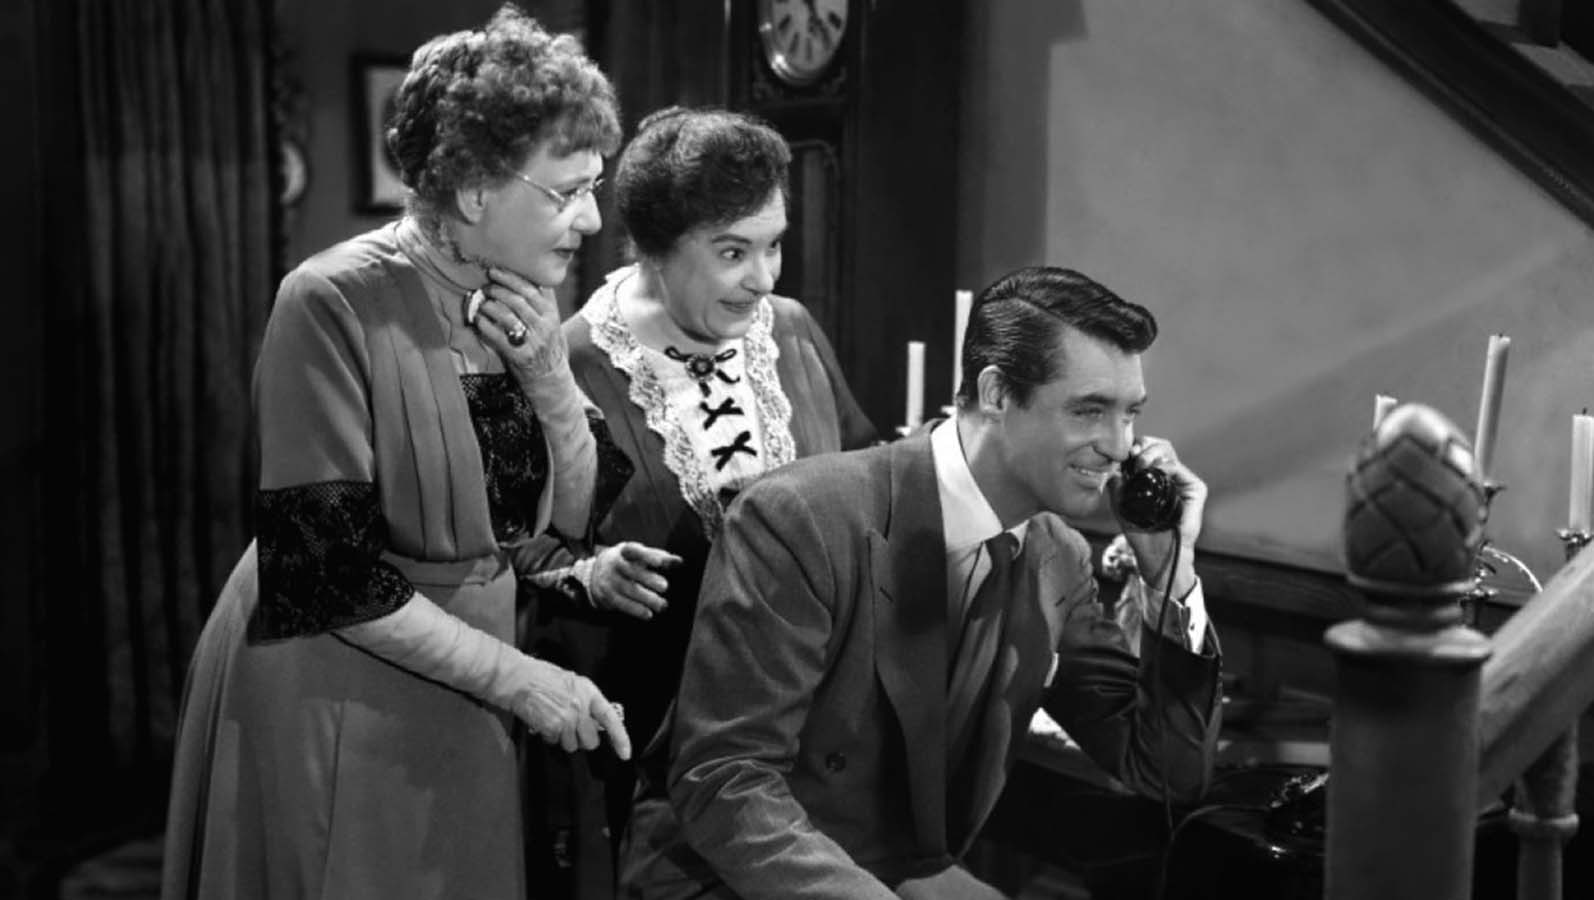 Arsenic and Old Lace, Cary Grant, monochrome, togetherness